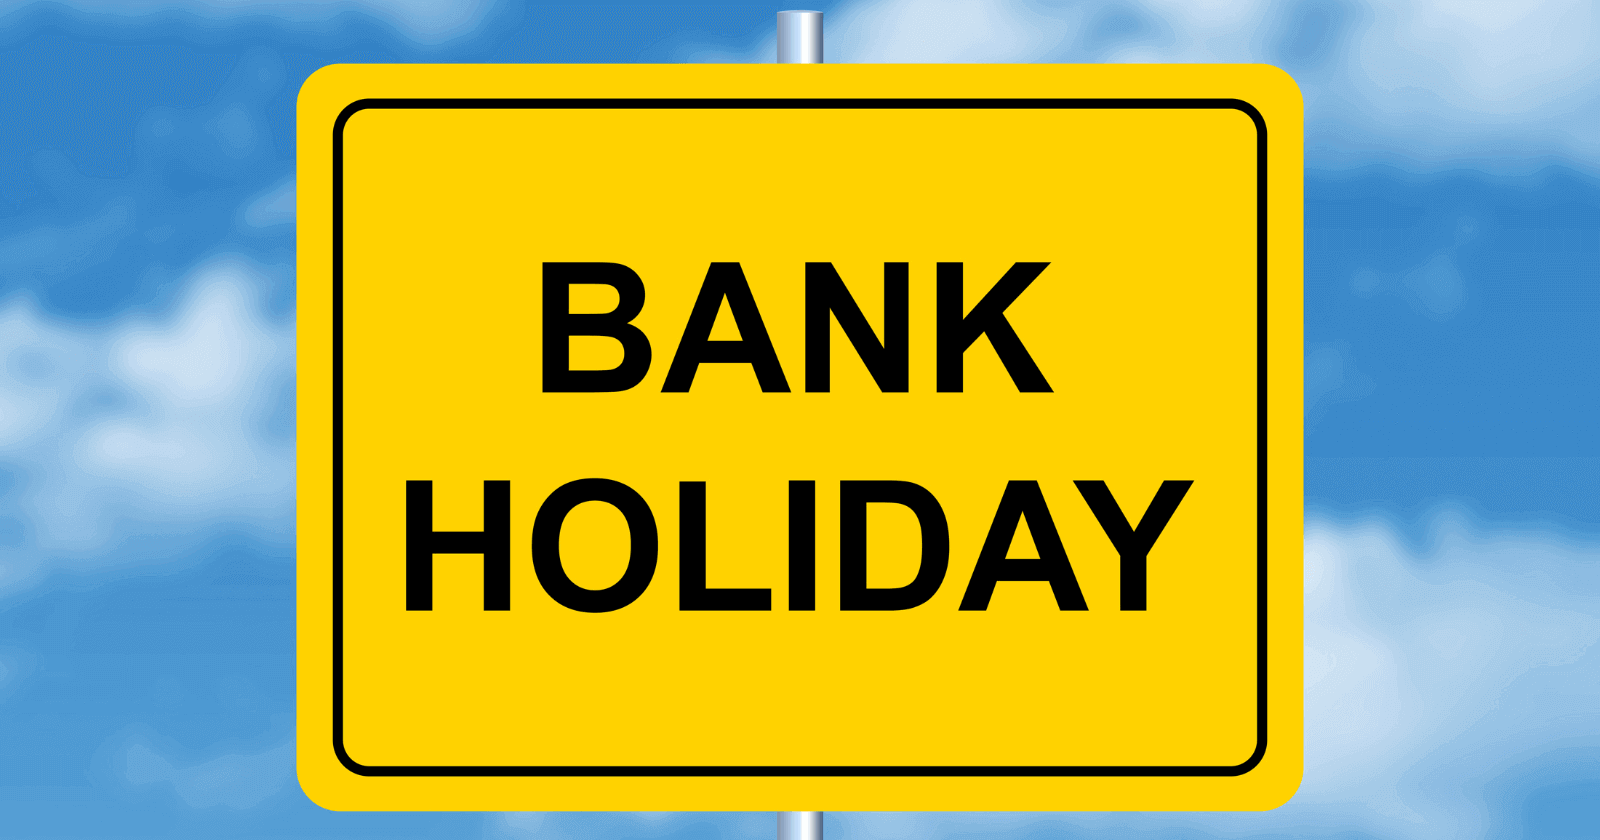 West Bengal Holidays List of Bank Holidays in West Bengal in 2023